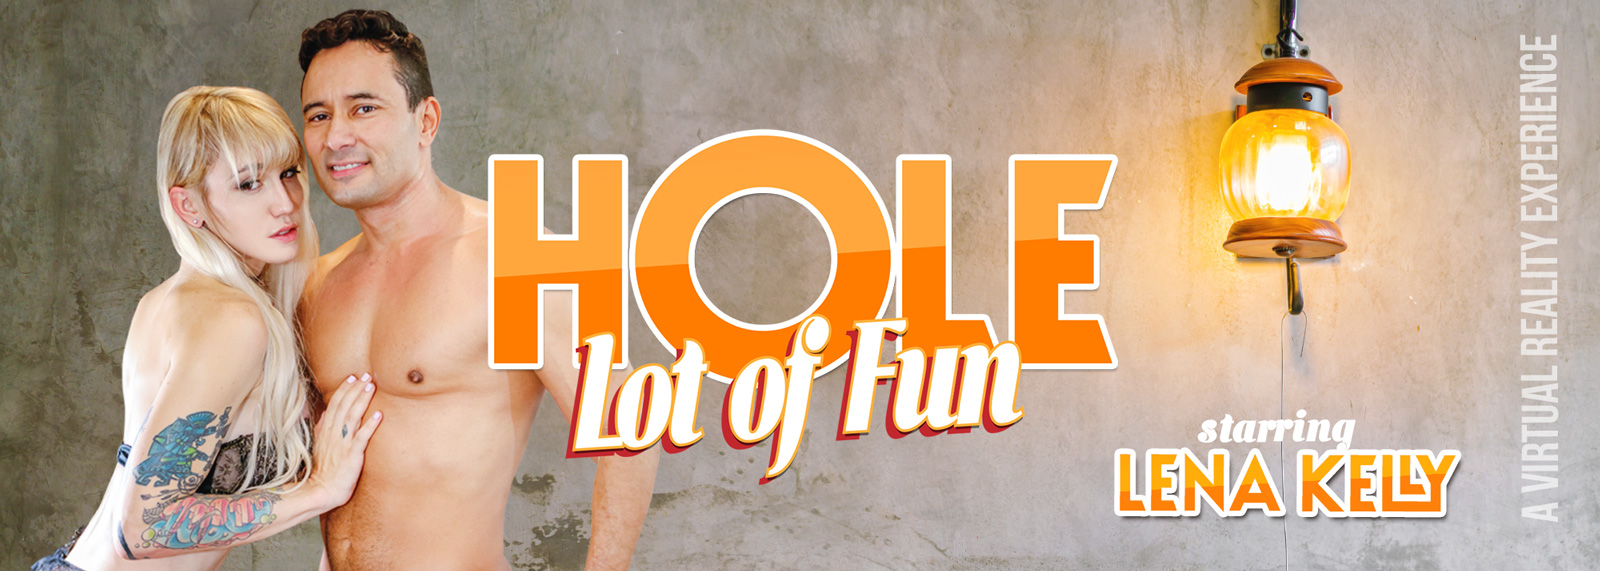 A Hole Lot of Fun - VR Porn Video, Starring Lena Kelly VR